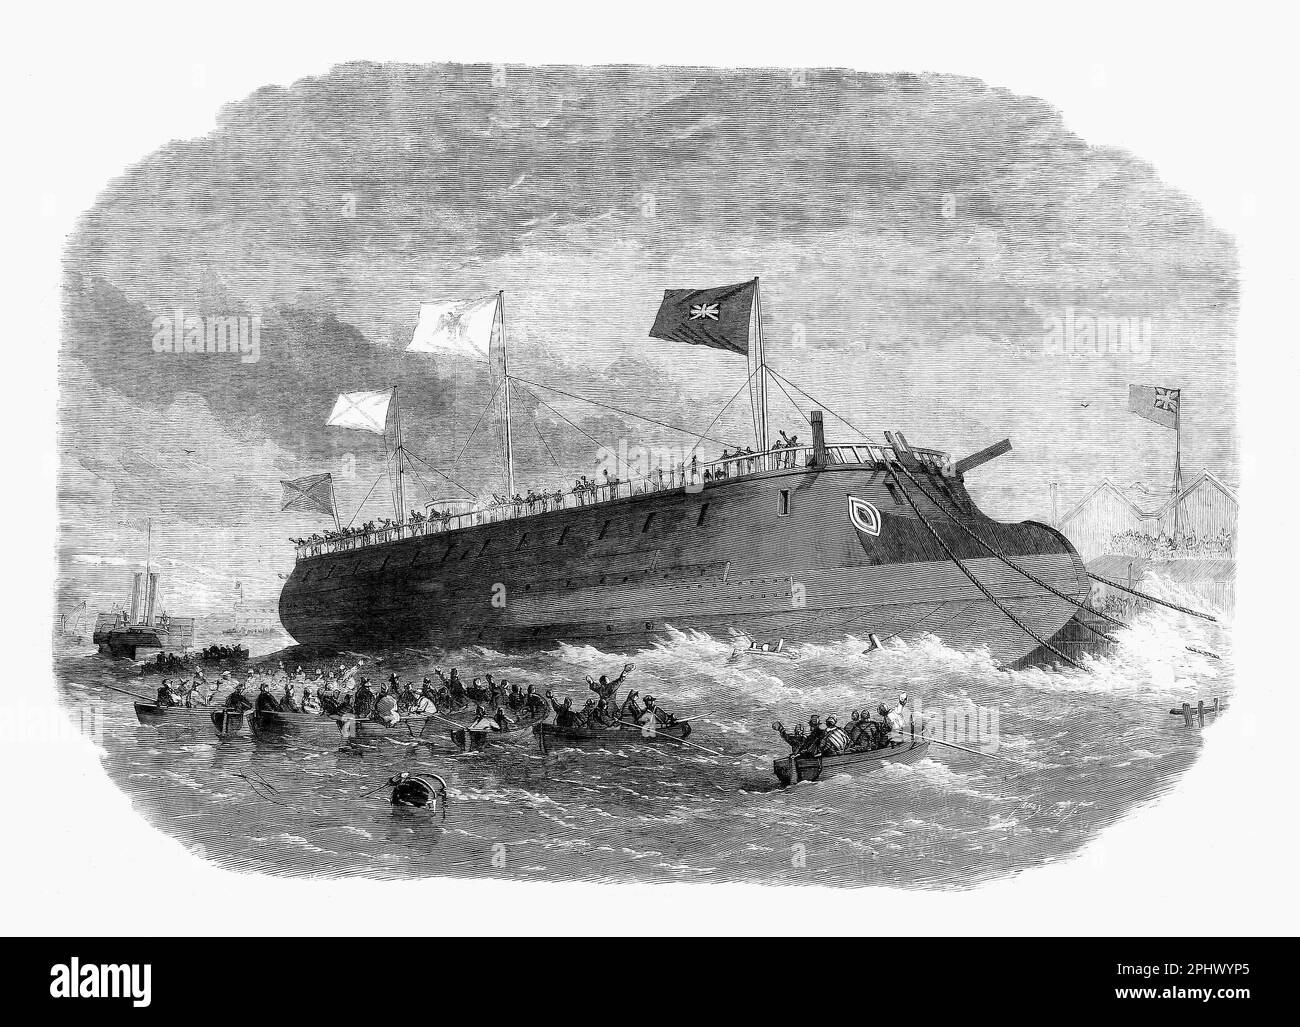 The launch of the Russian Ironclad Floating Battery 'Pervenetz' at Blackwall Thames Iron Shipbuilding Company's yard in London, England. It was an armoured frigate built for the Imperial Russian Navy in the 1860s  because the Russian Empire lacked the ability to build its own ironclads. It never saw combat  and was later converted into a coal barge. Stock Photo